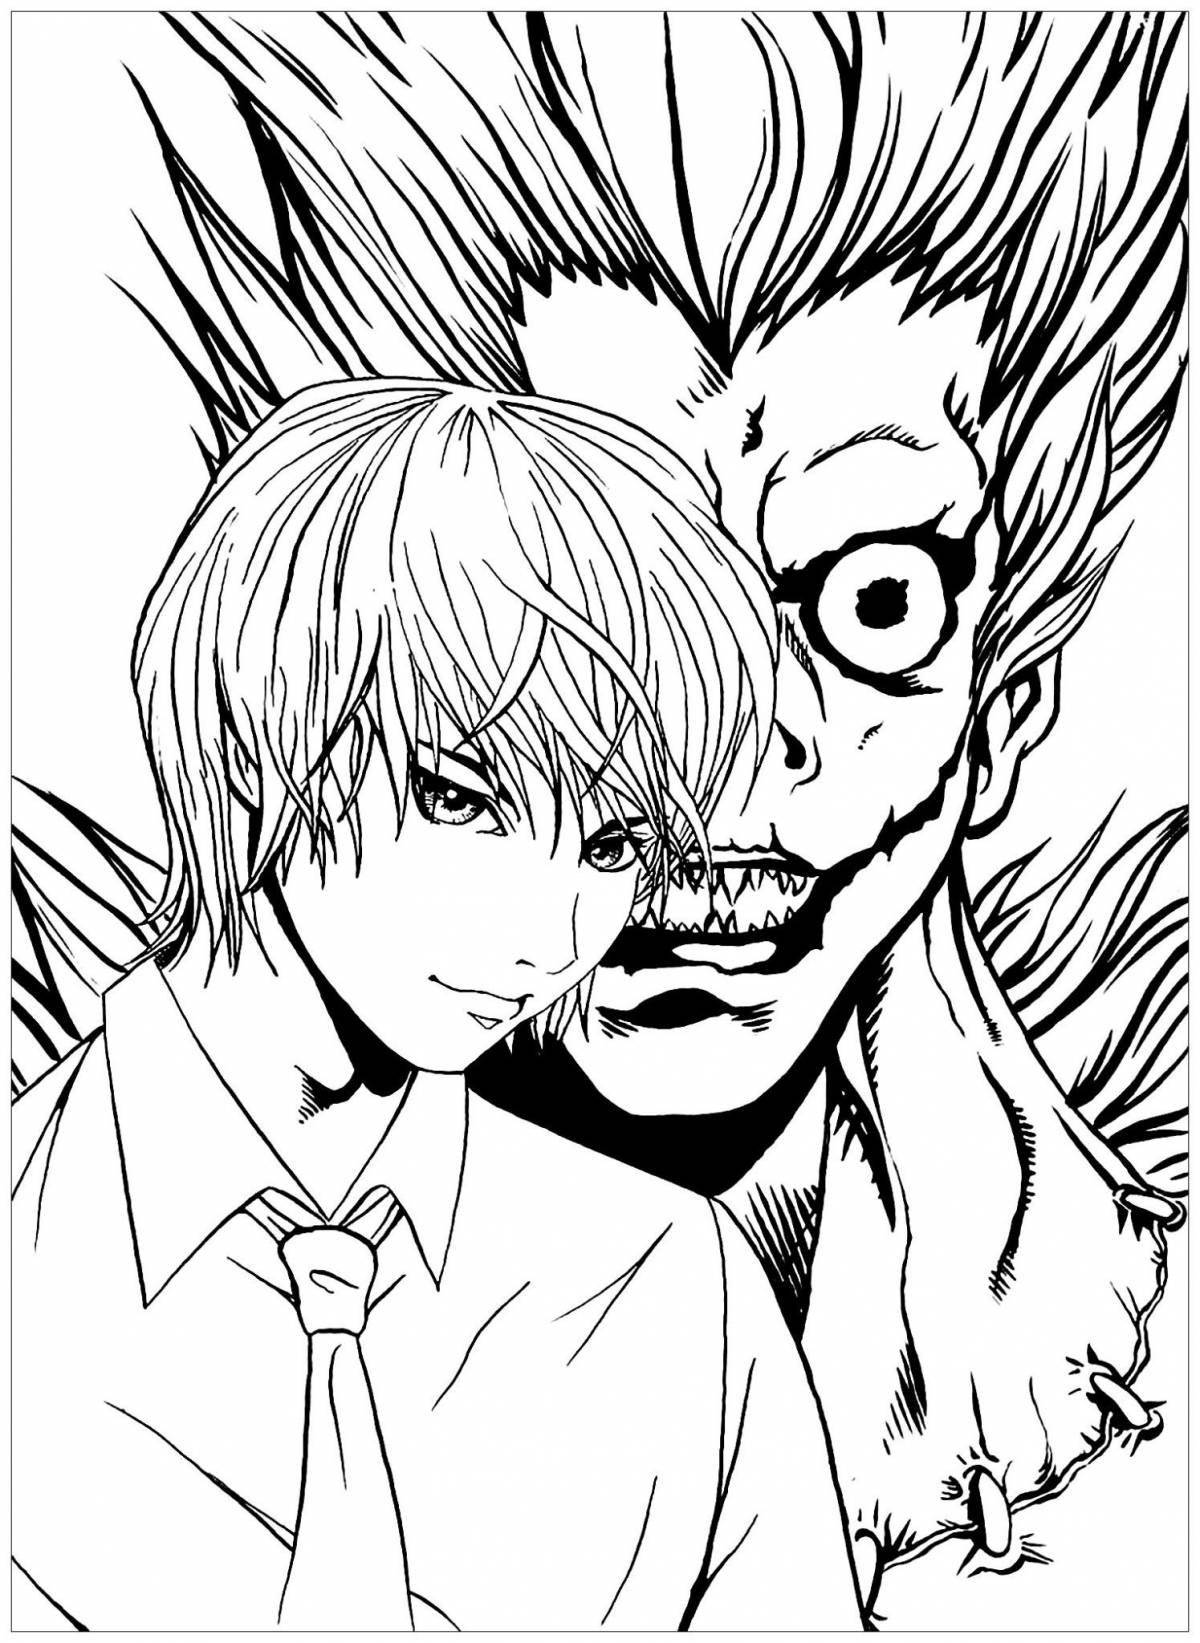 Death note dramatic coloring book